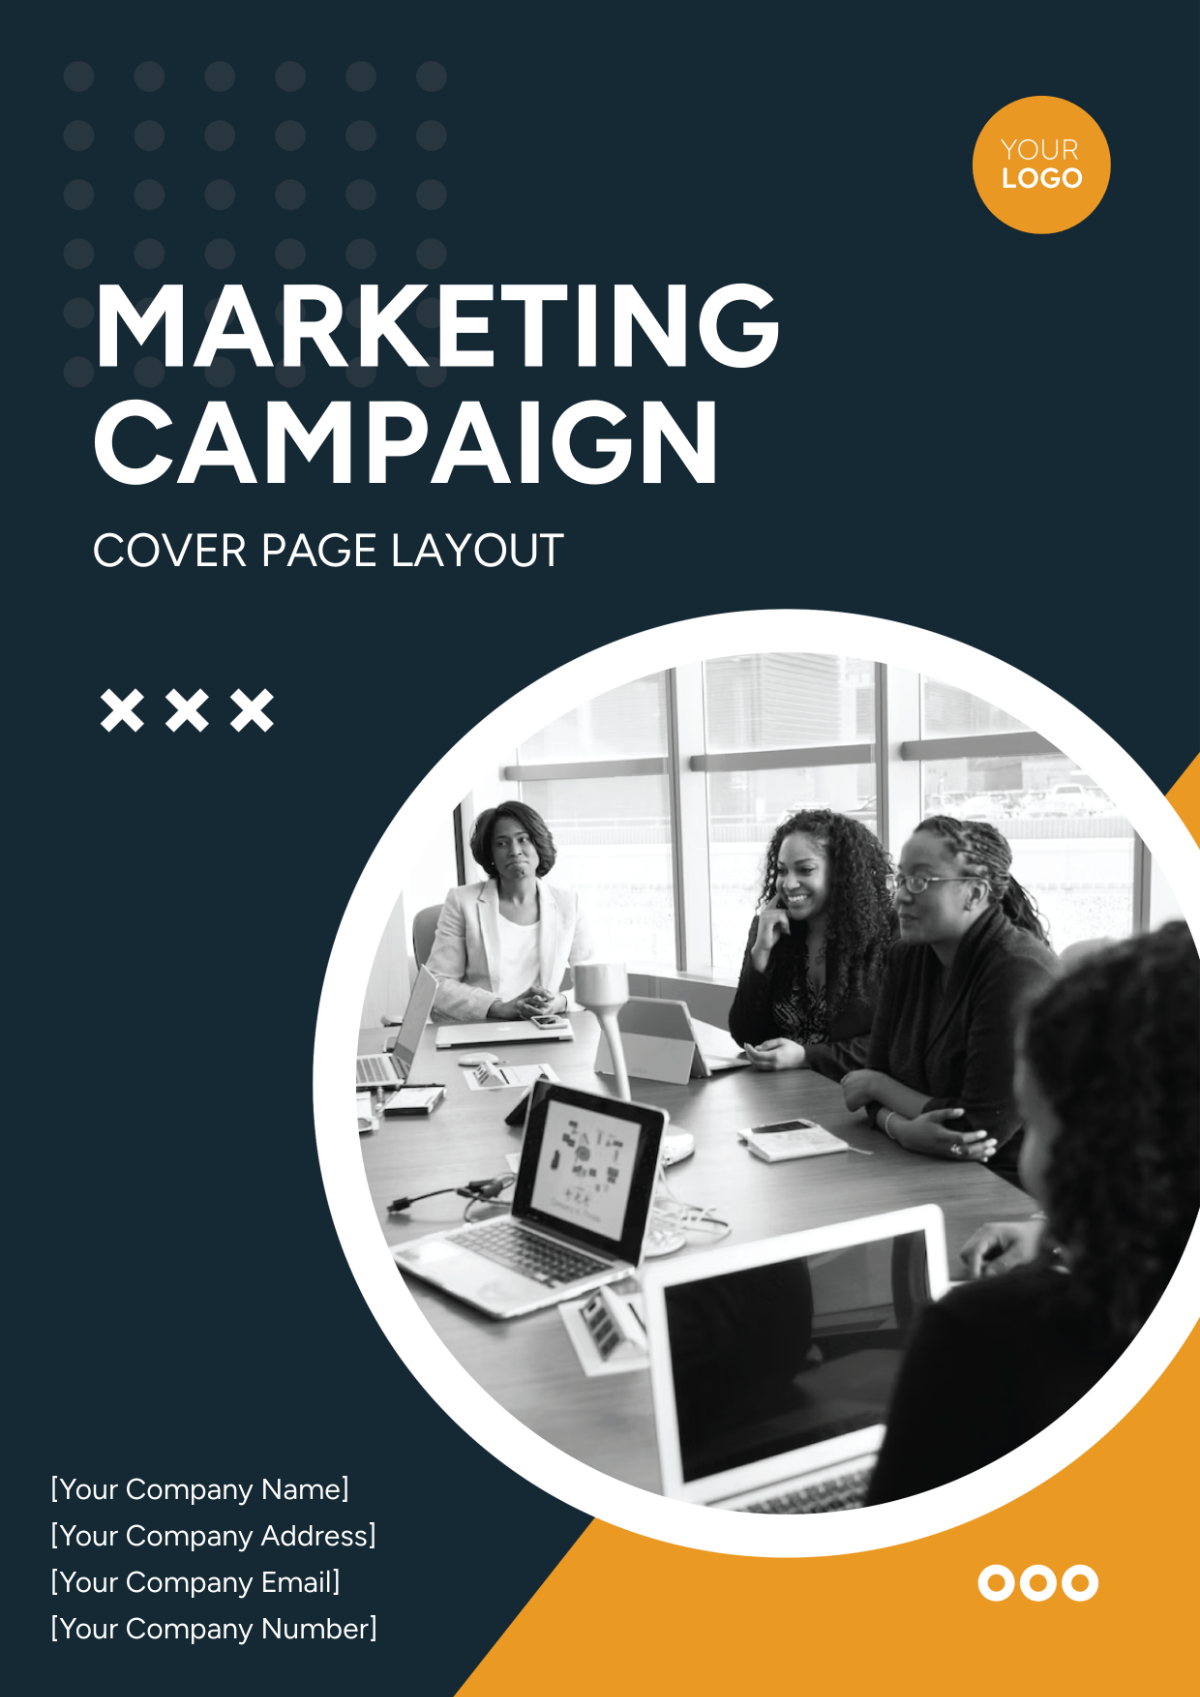 Marketing Campaign Cover Page Layout